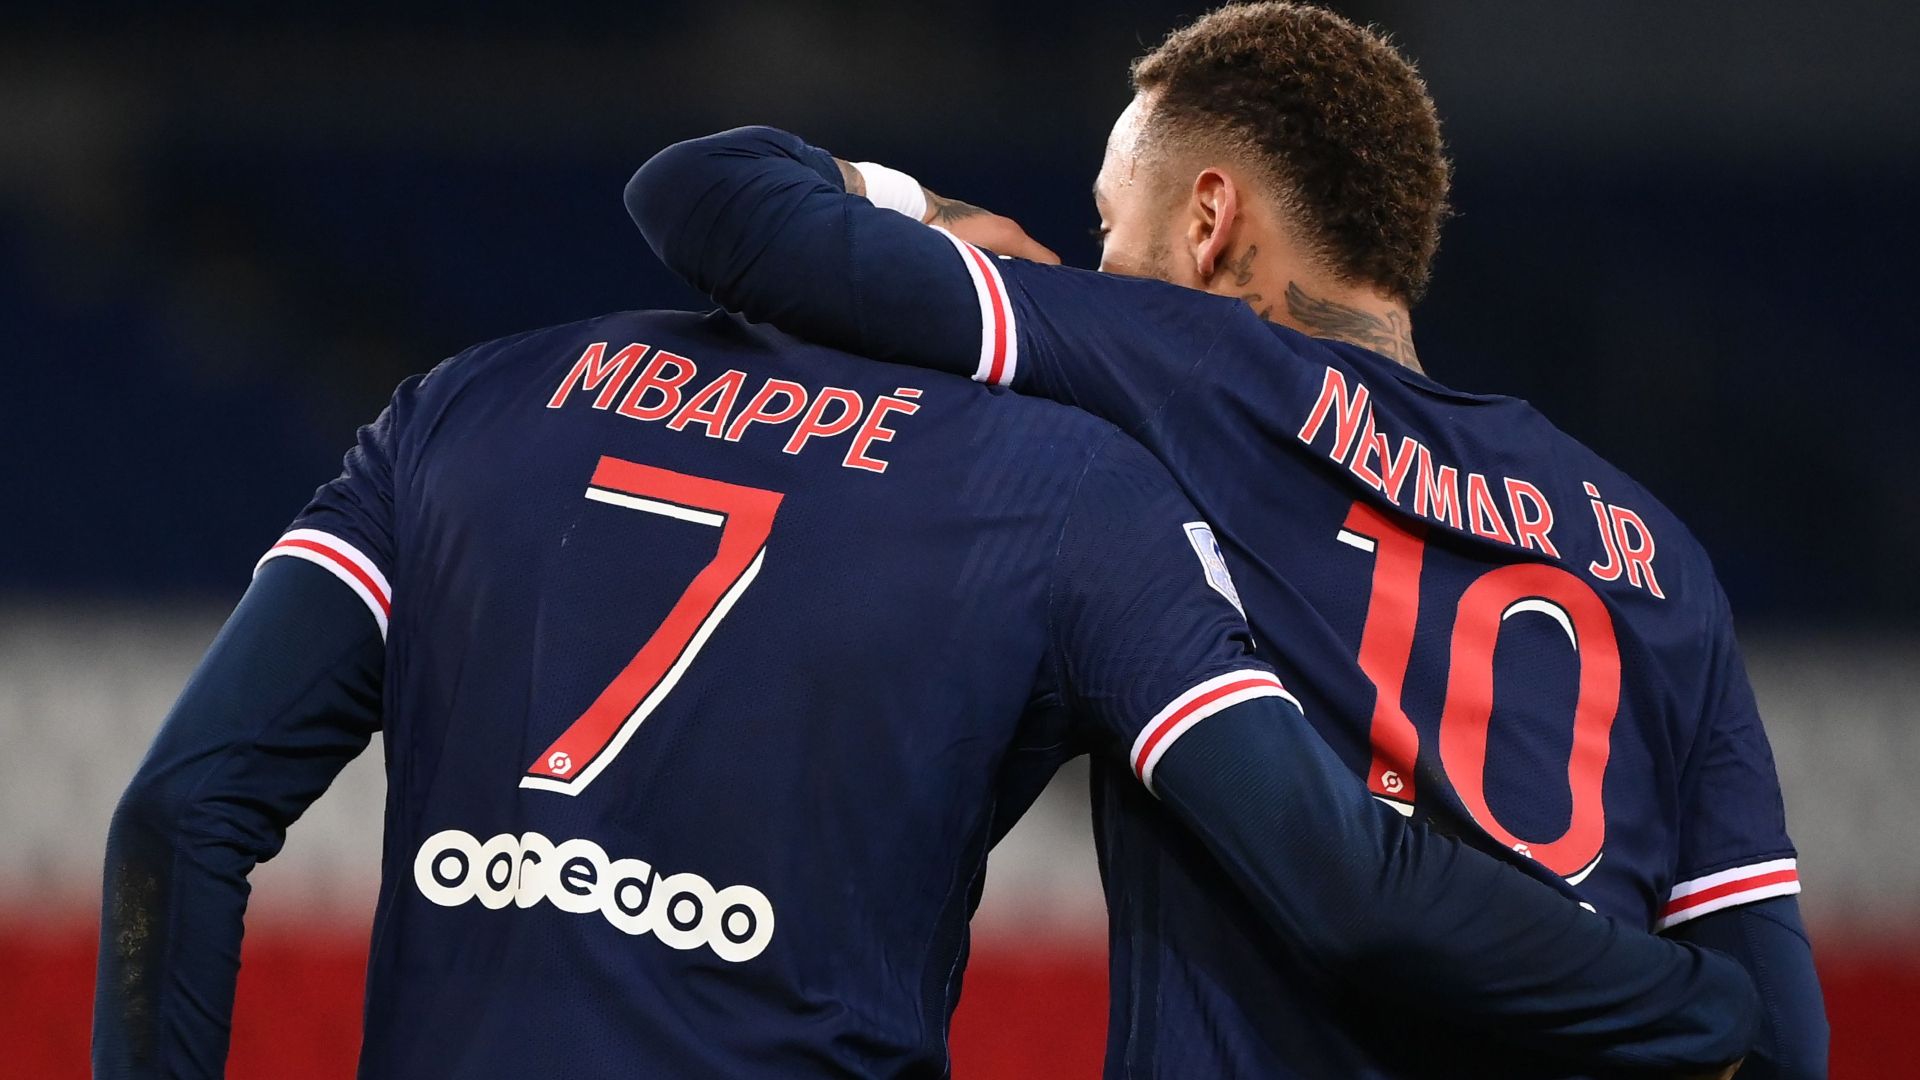 Stop with nonsense like that' angered by claims Mbappe plays better without Neymar